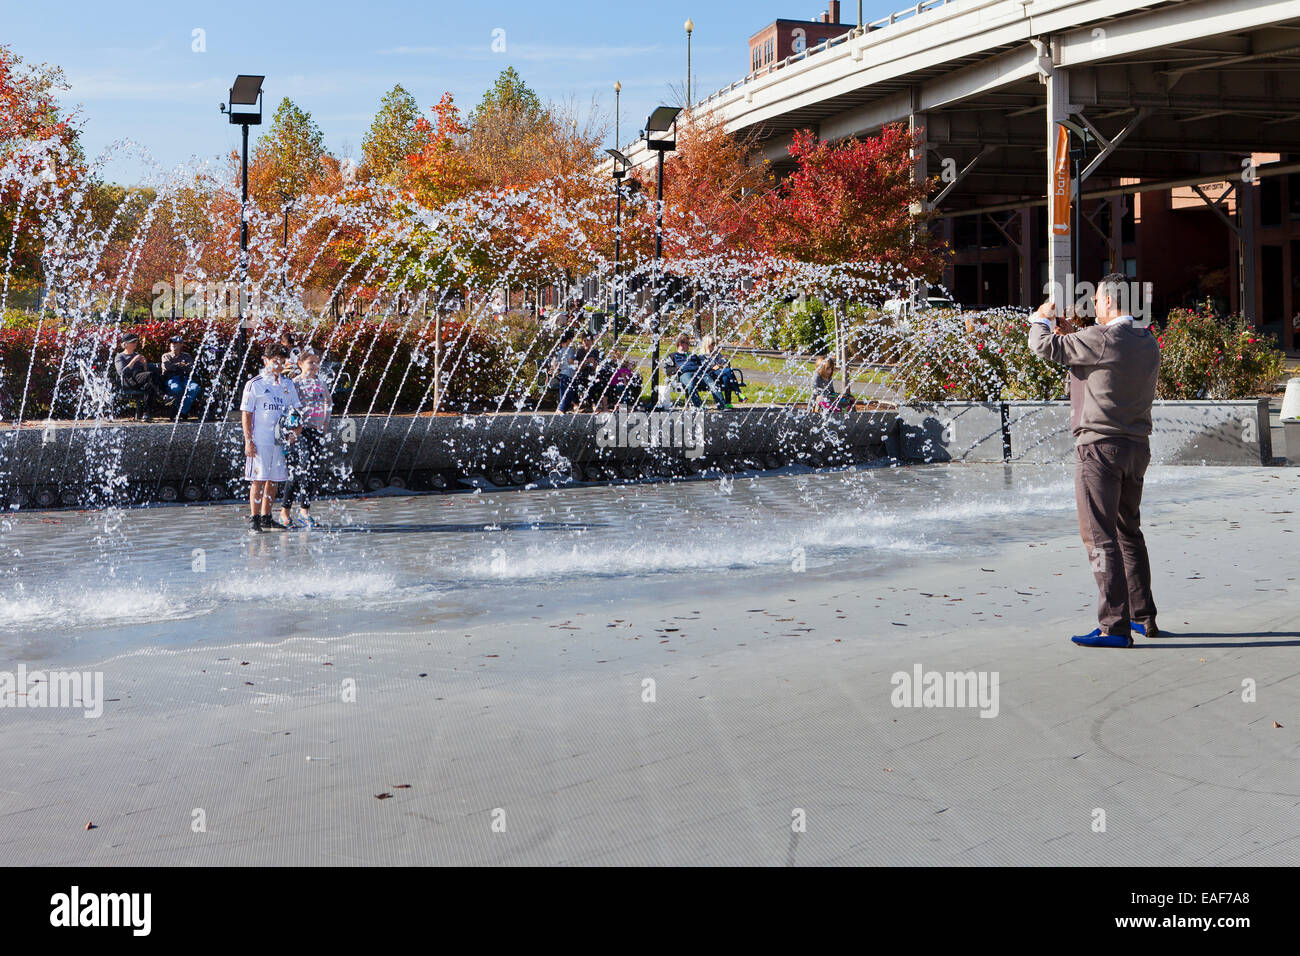 Man taking pictures of children at play fountain - Georgetown, Washington, DC USA Stock Photo